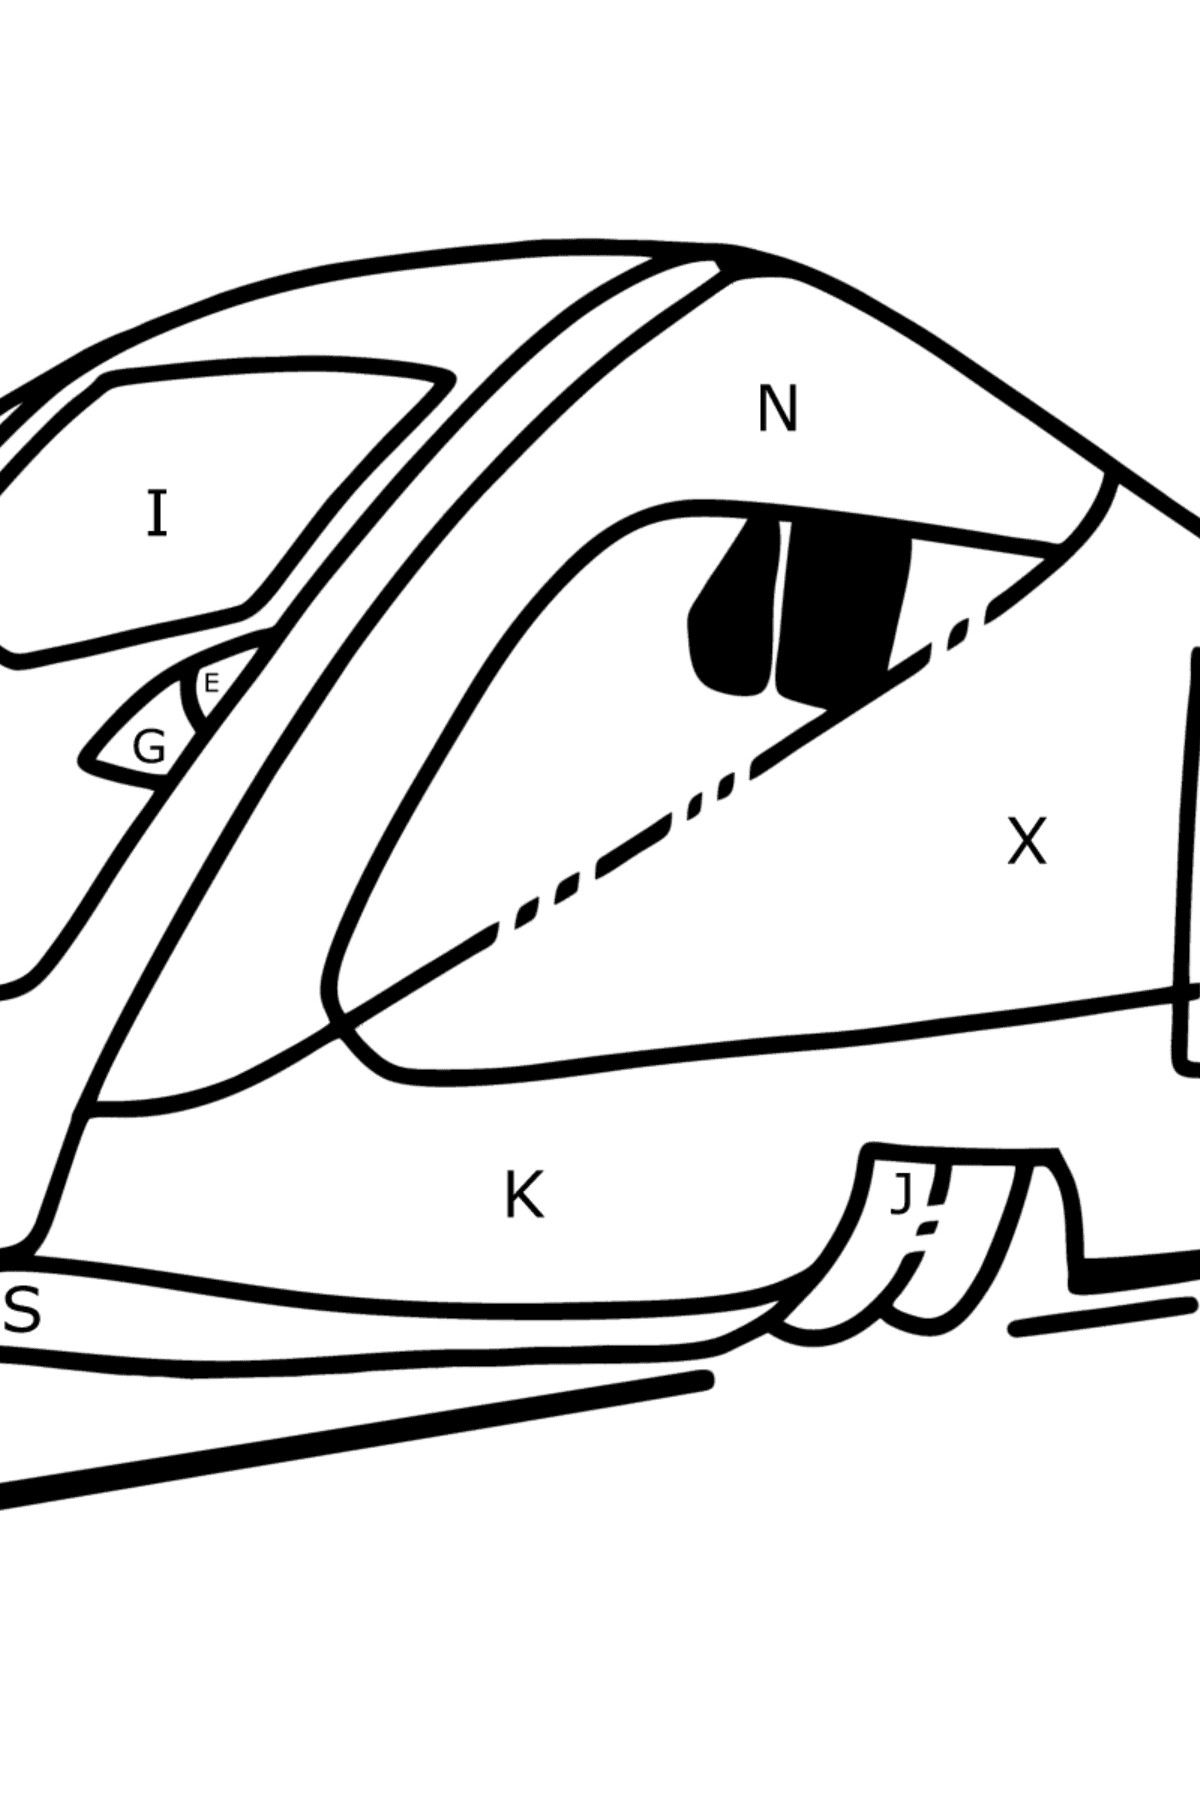 Train coloring page for children - Coloring by Letters for Kids